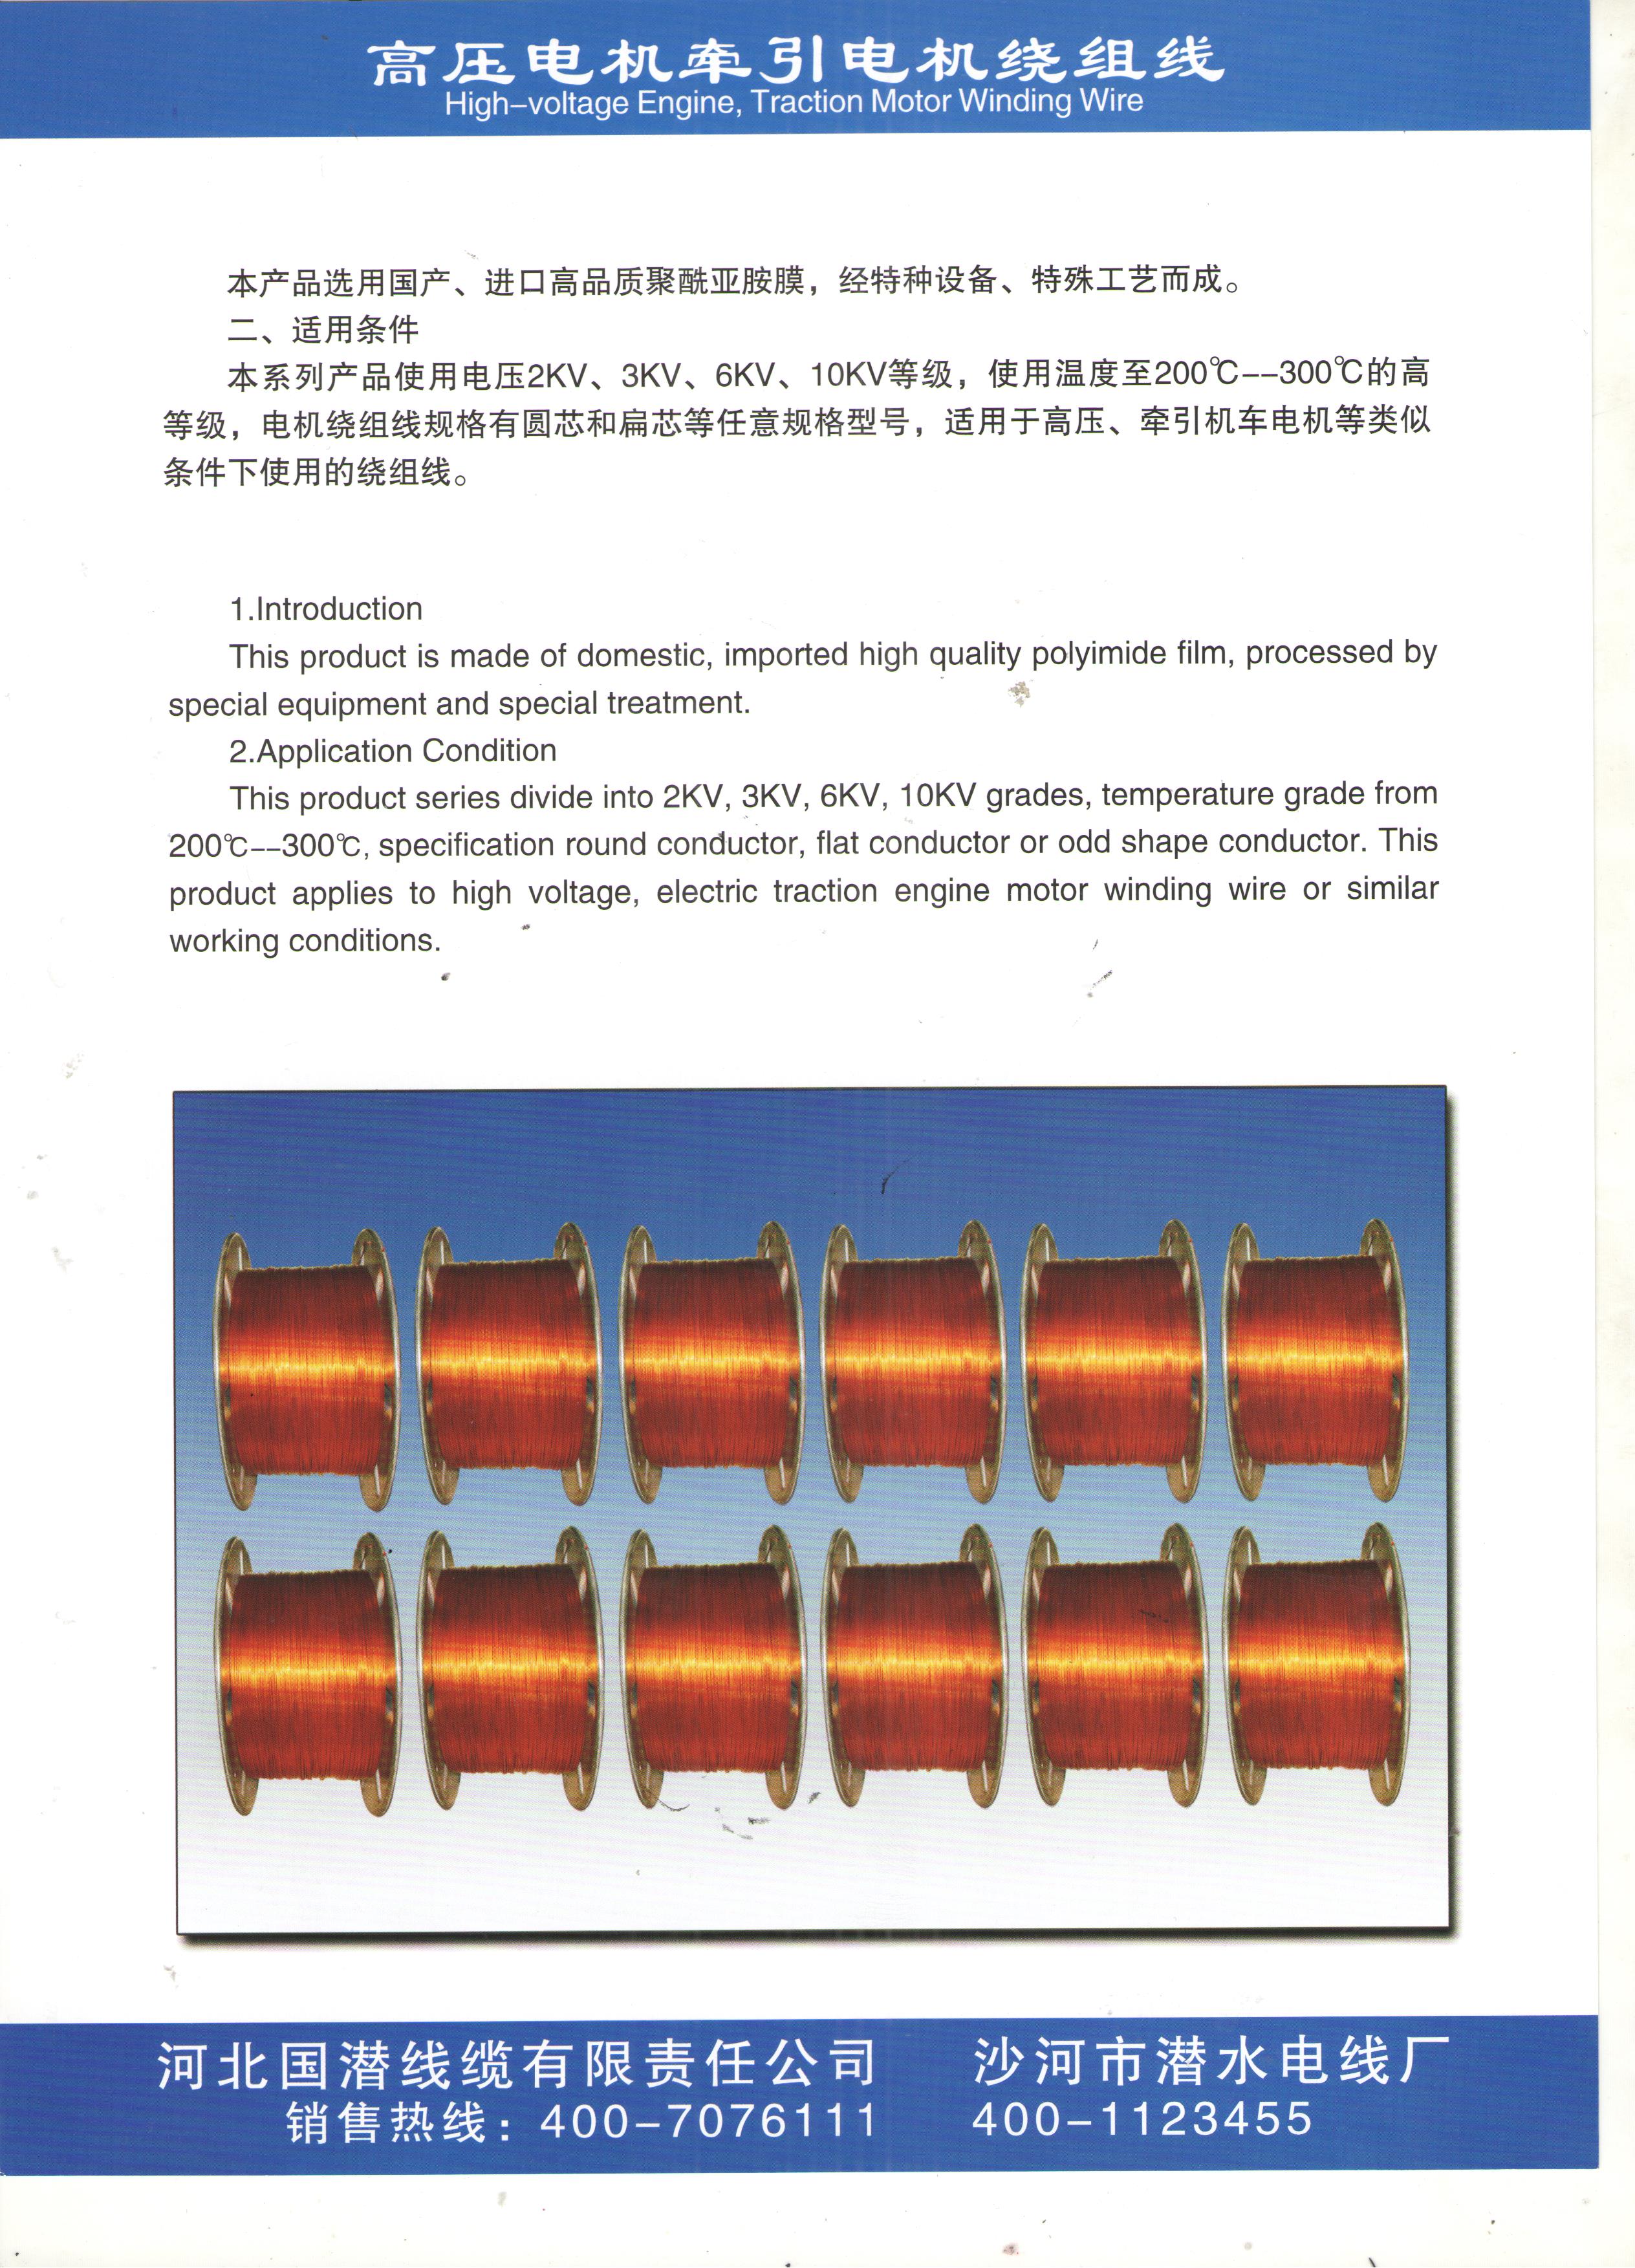 submersible winding wire